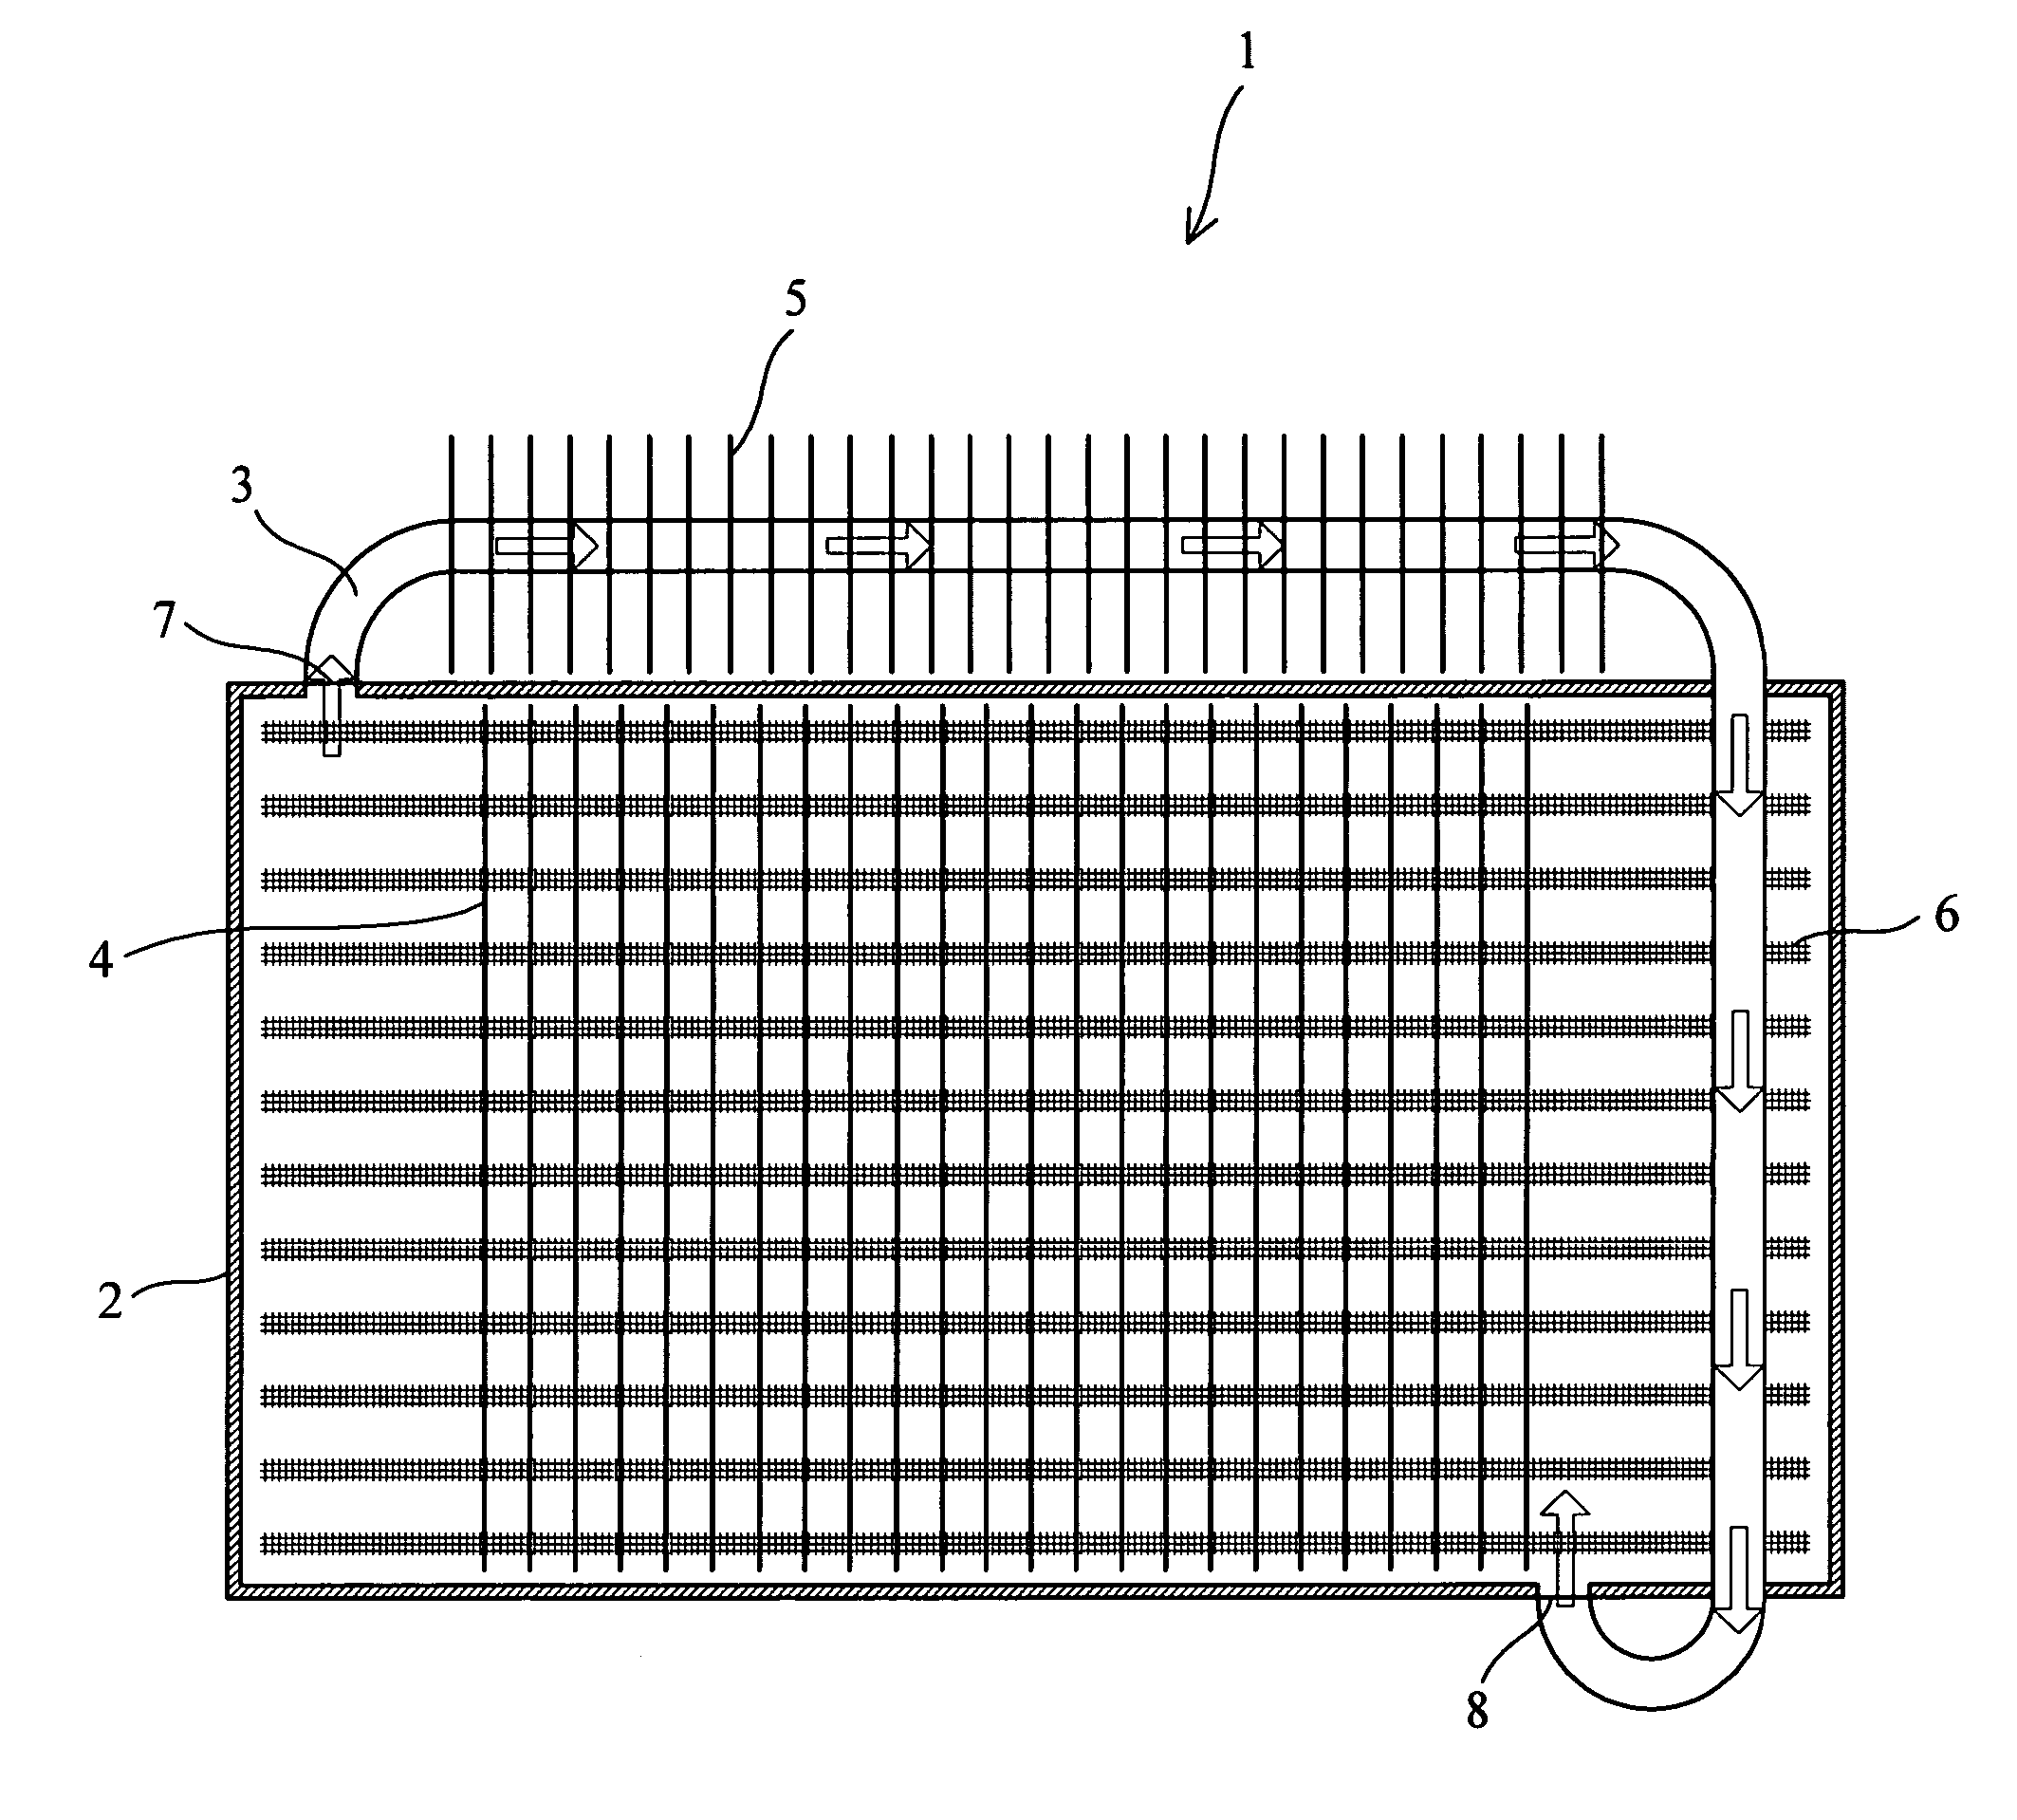 Closed-loop cycling type heat-dissipation apparatus